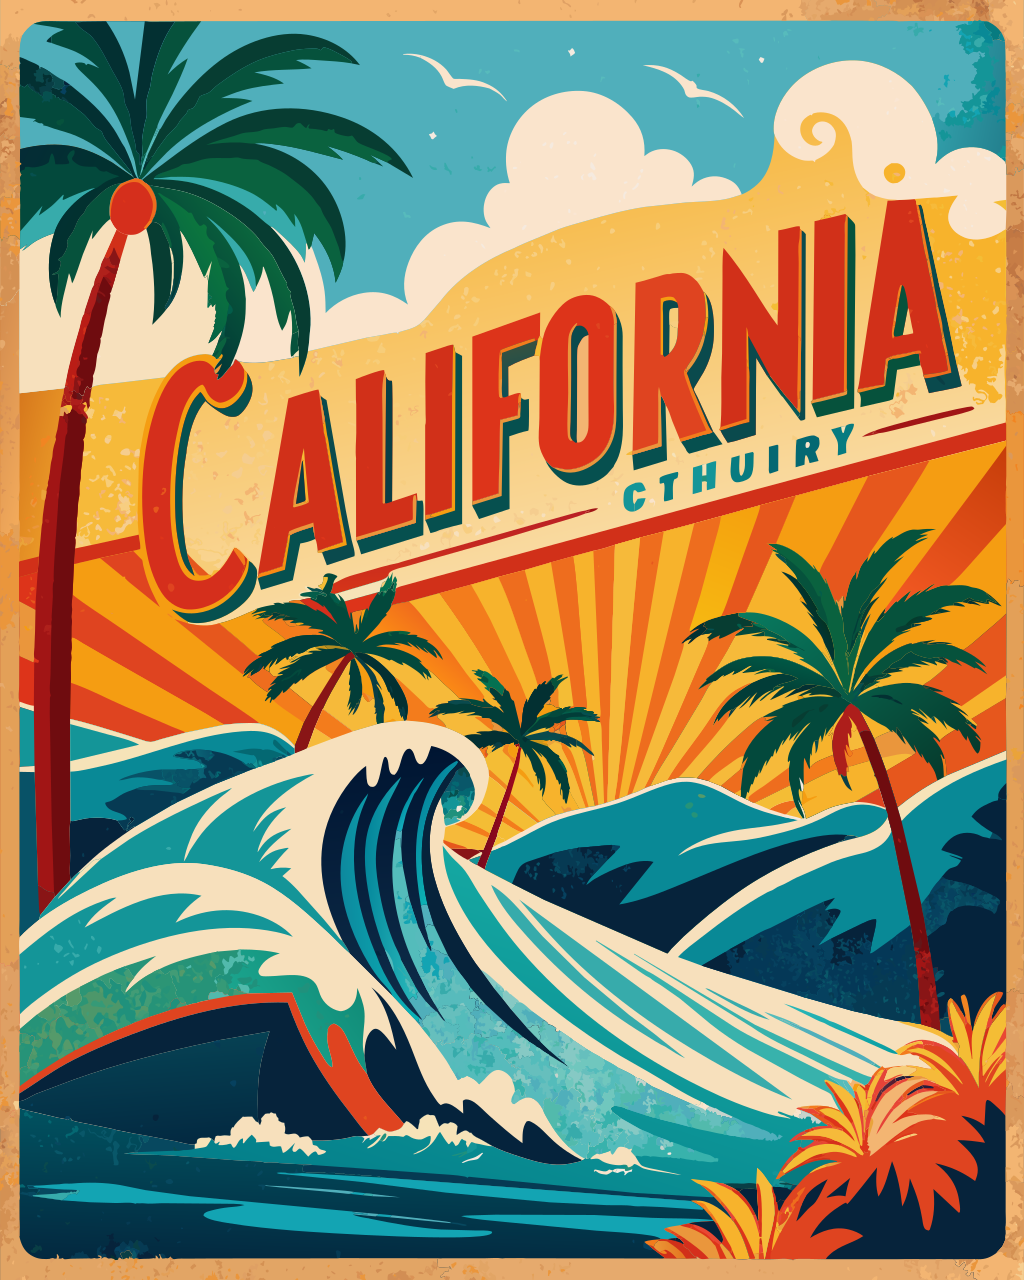 Vintage Painterly style of a California travel poster showing beach, waves, palm trees, vibrant, illustration, typography, painting